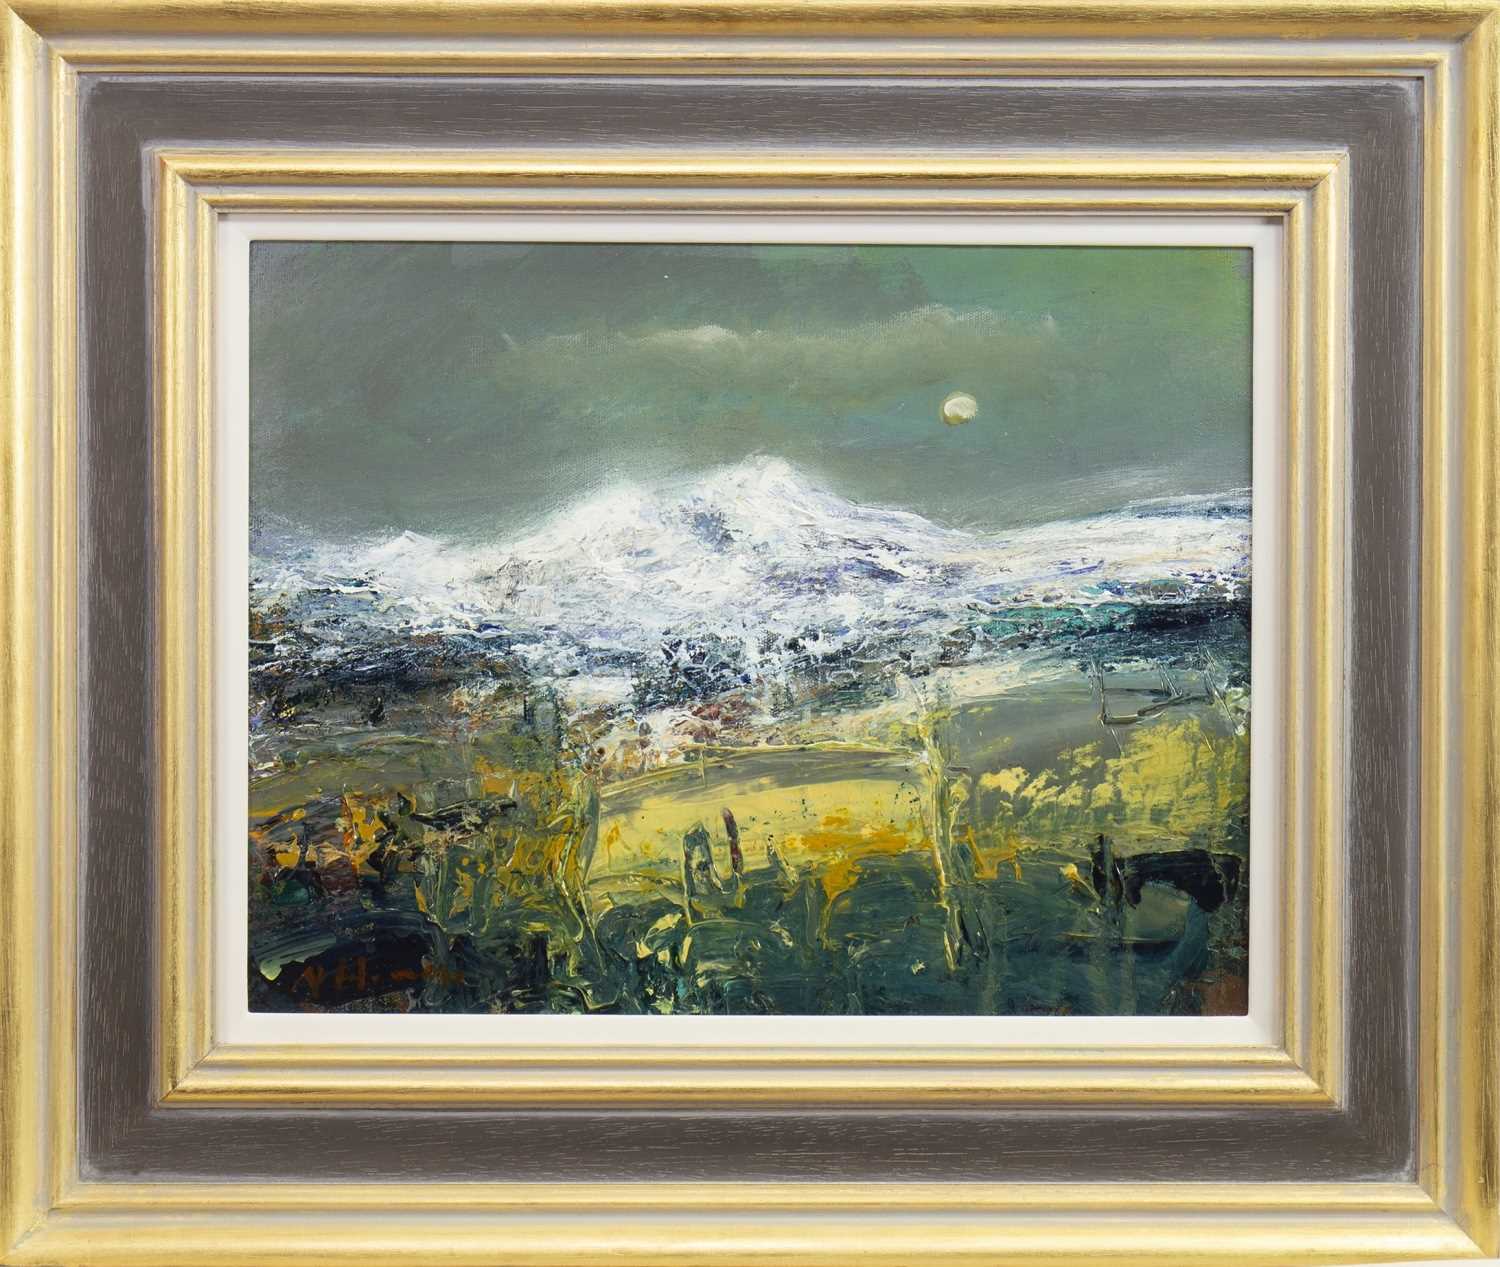 Lot 103 - ROAD TO THE HIGHLANDS, AN OIL BY NAEL HANNA